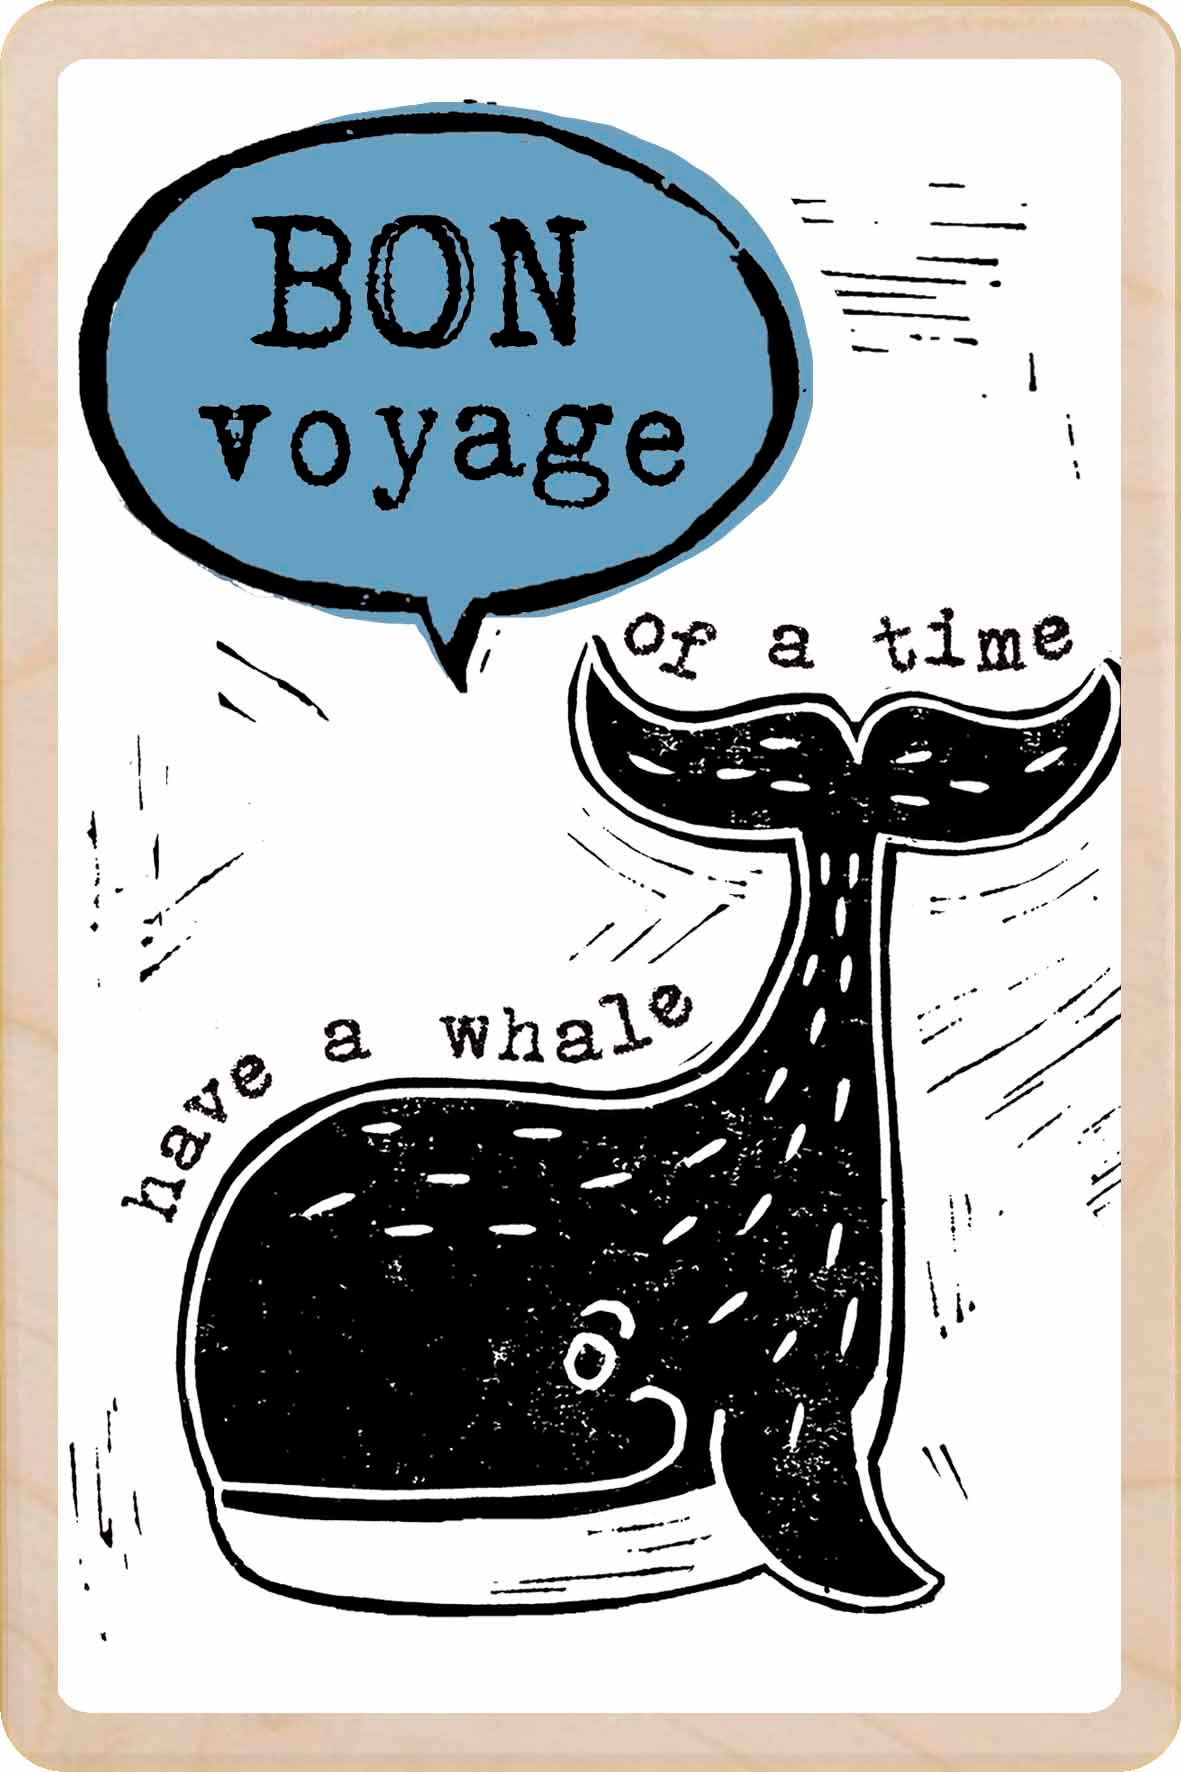 BON VOYAGE, HAVE A WHALE OF A TIME